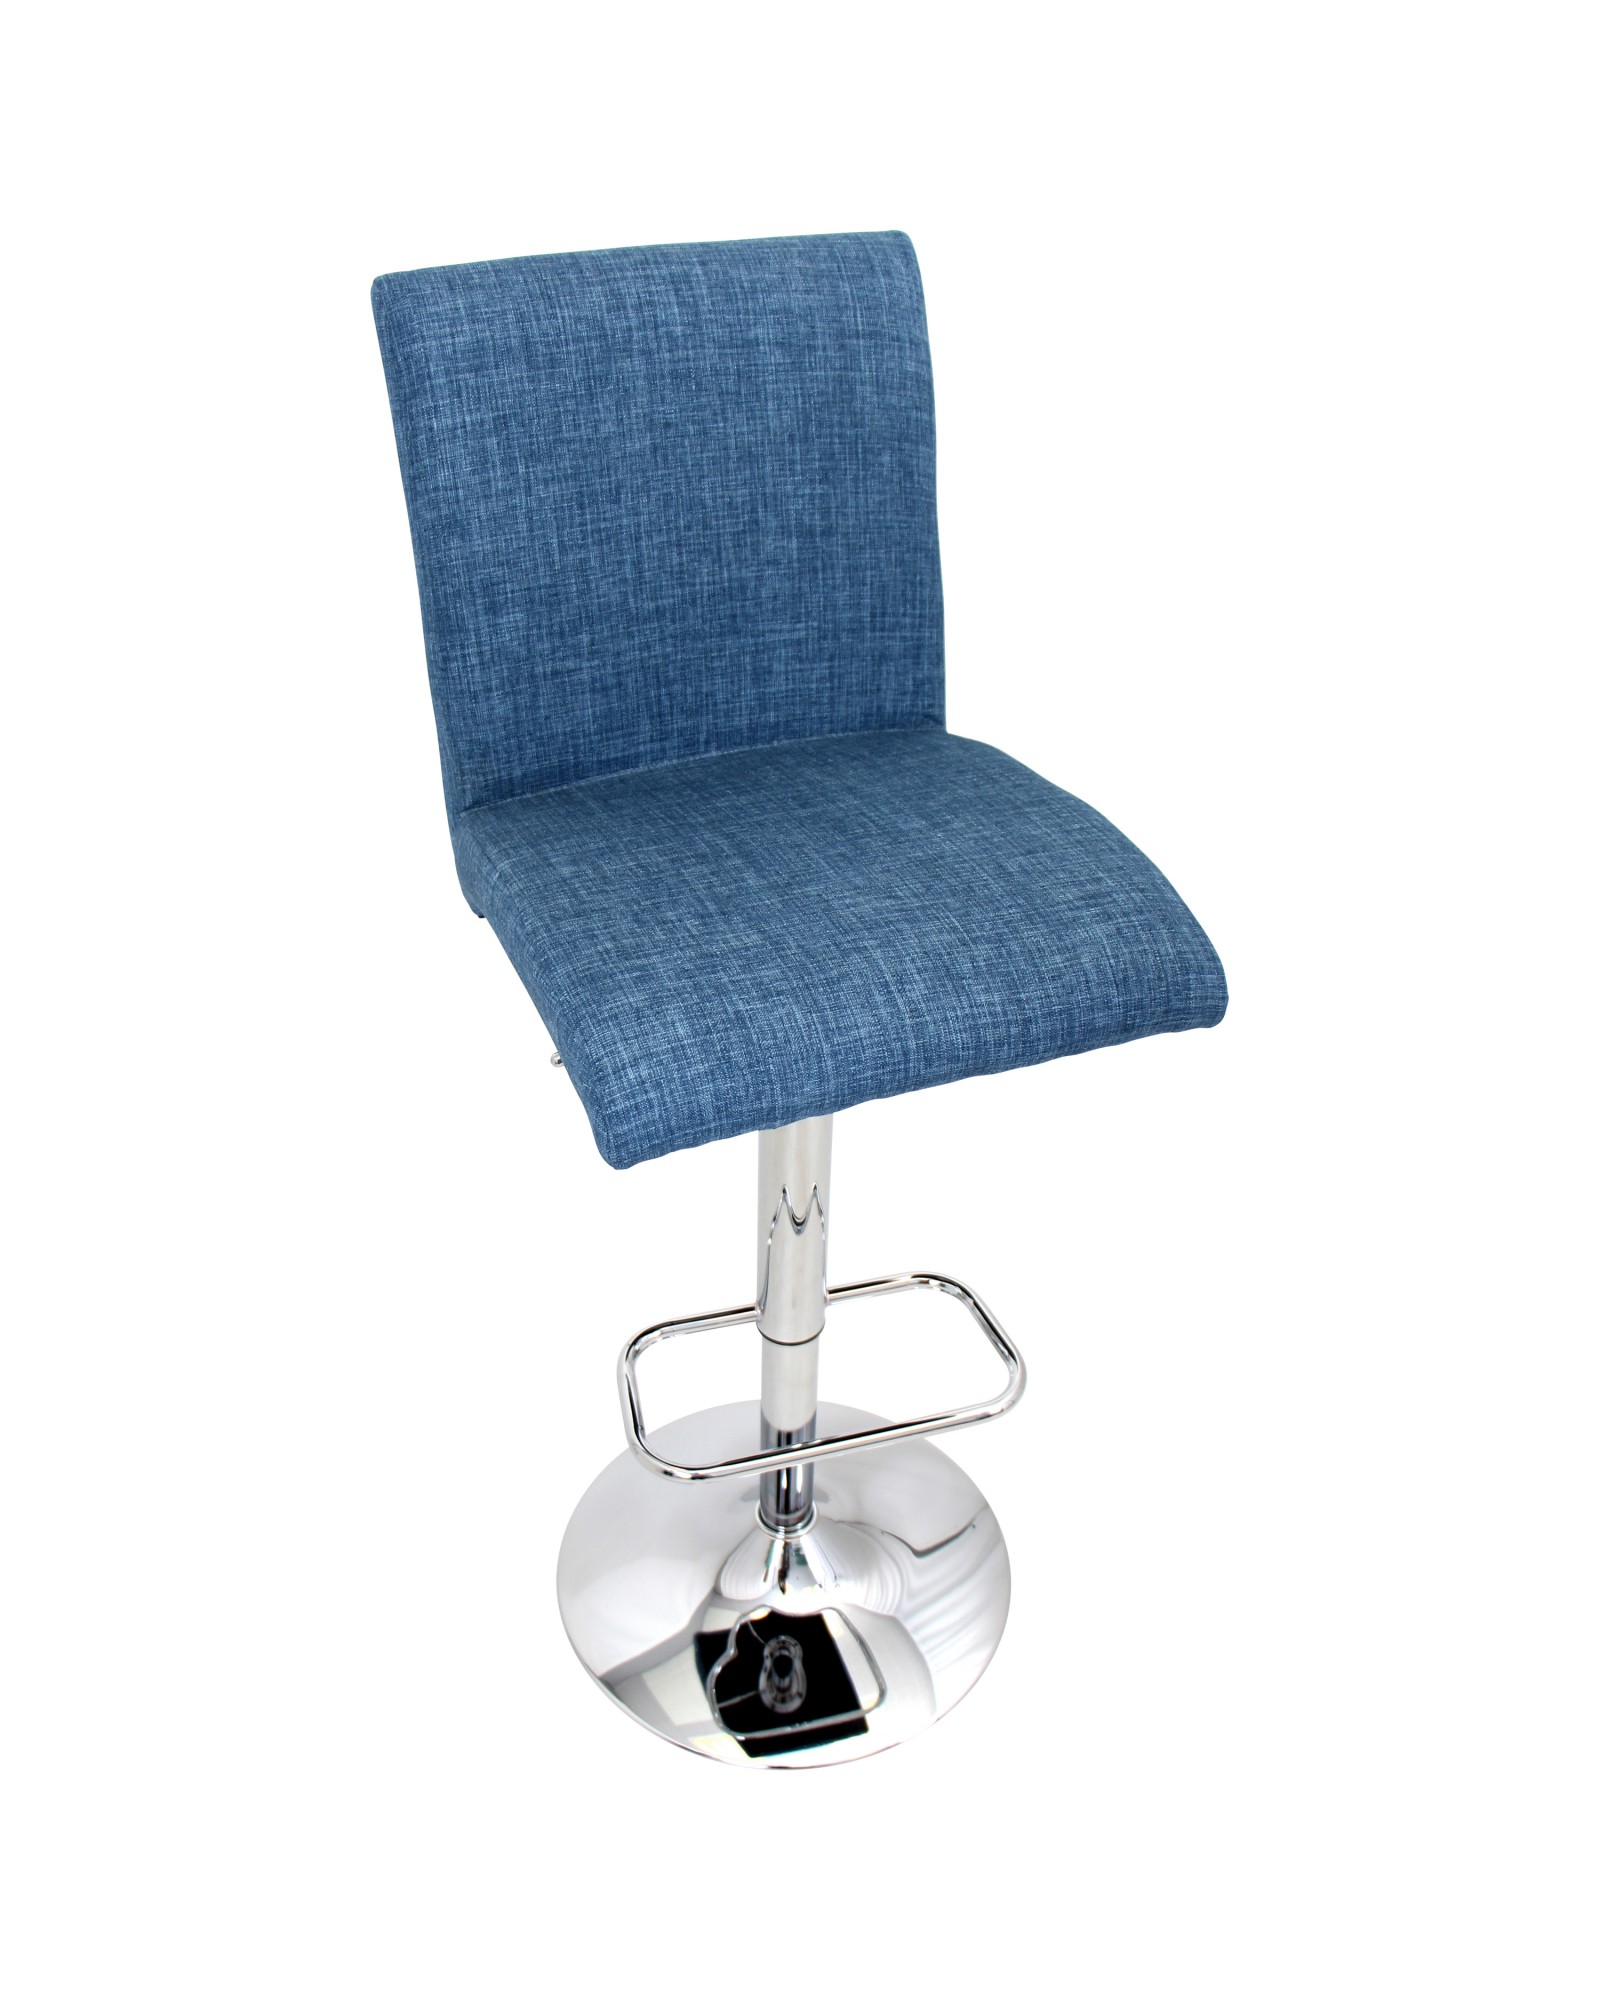 Tintori Contemporary Adjustable Barstool with Swivel in Blue